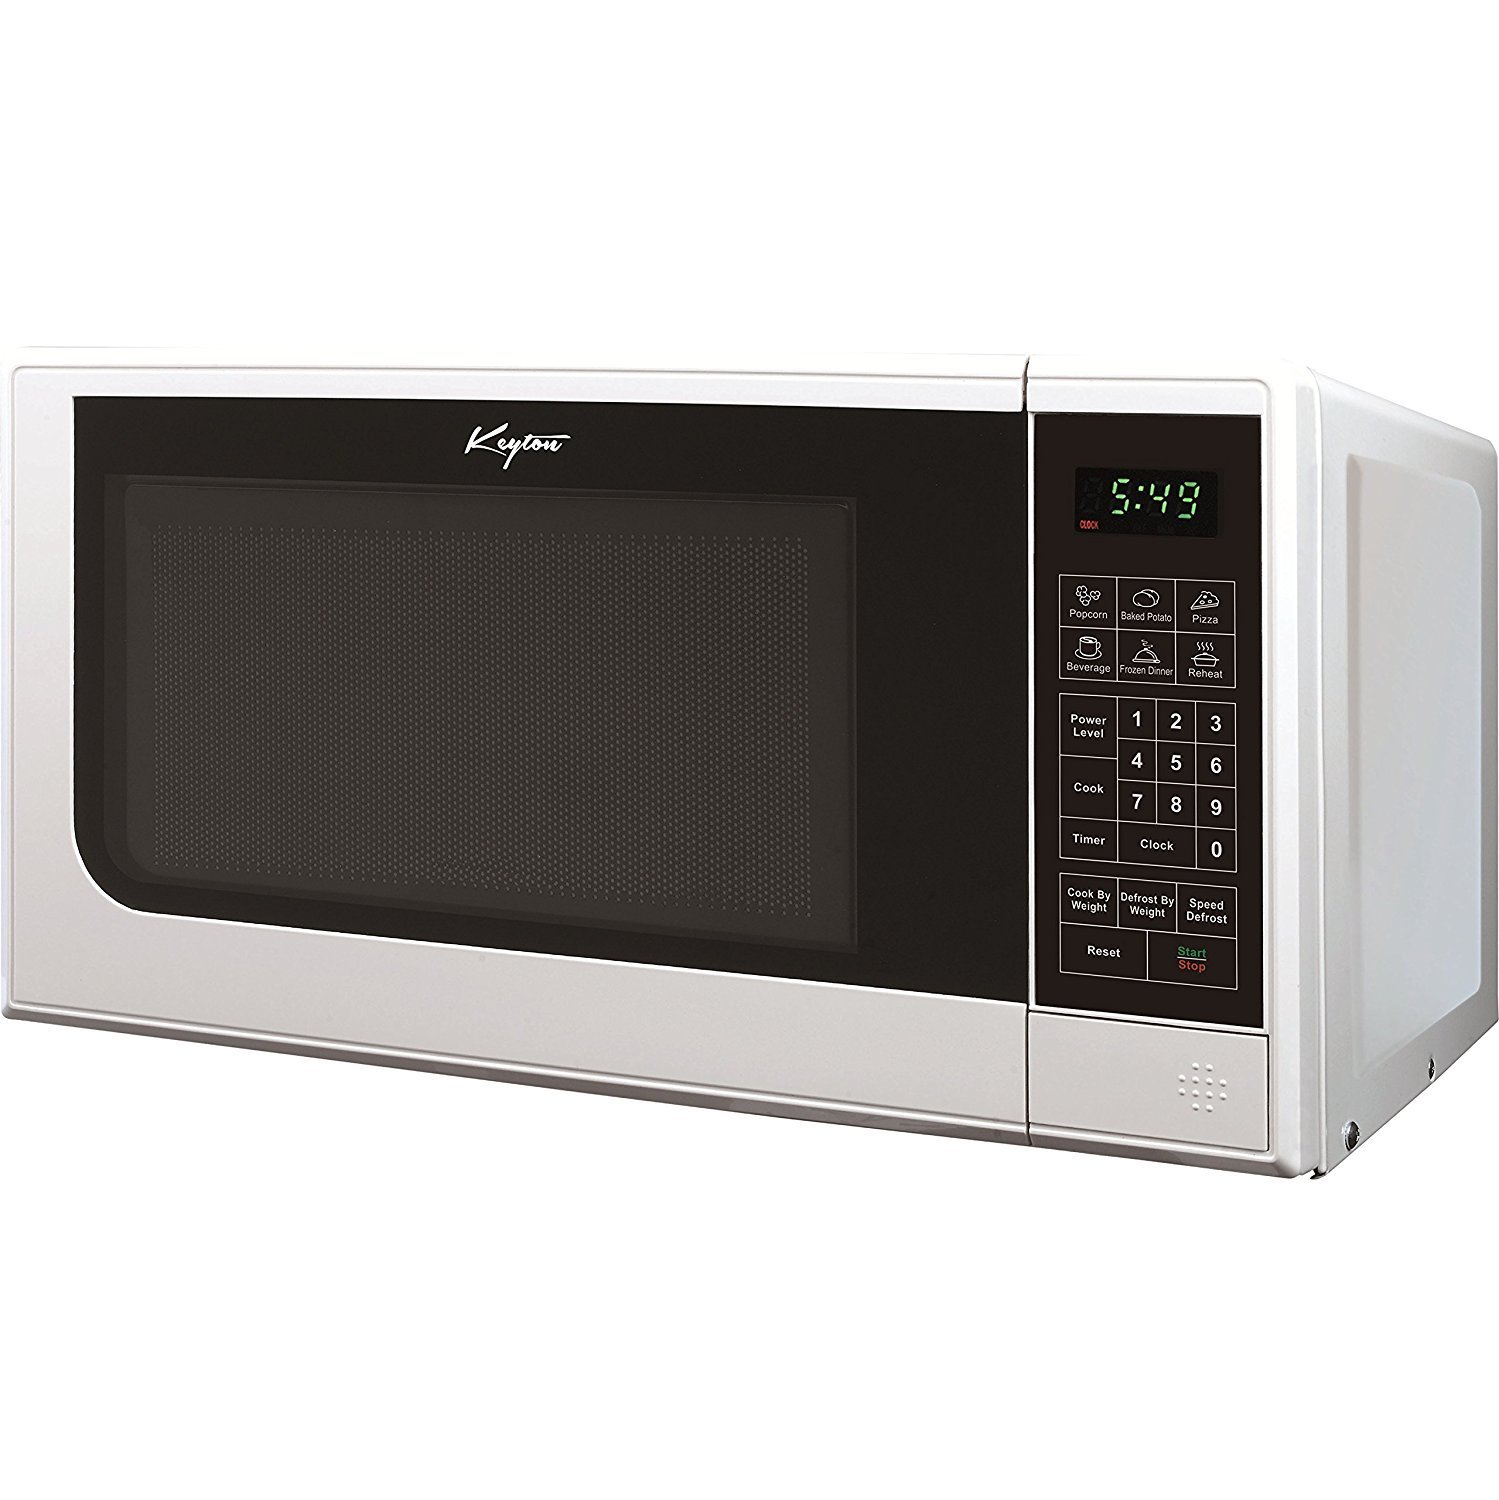 Keyton K-0.7MICROWAVEWHT Microwave Oven with 6 Instant Cooking Settings & 10 Power Levels and a Digital Display, White